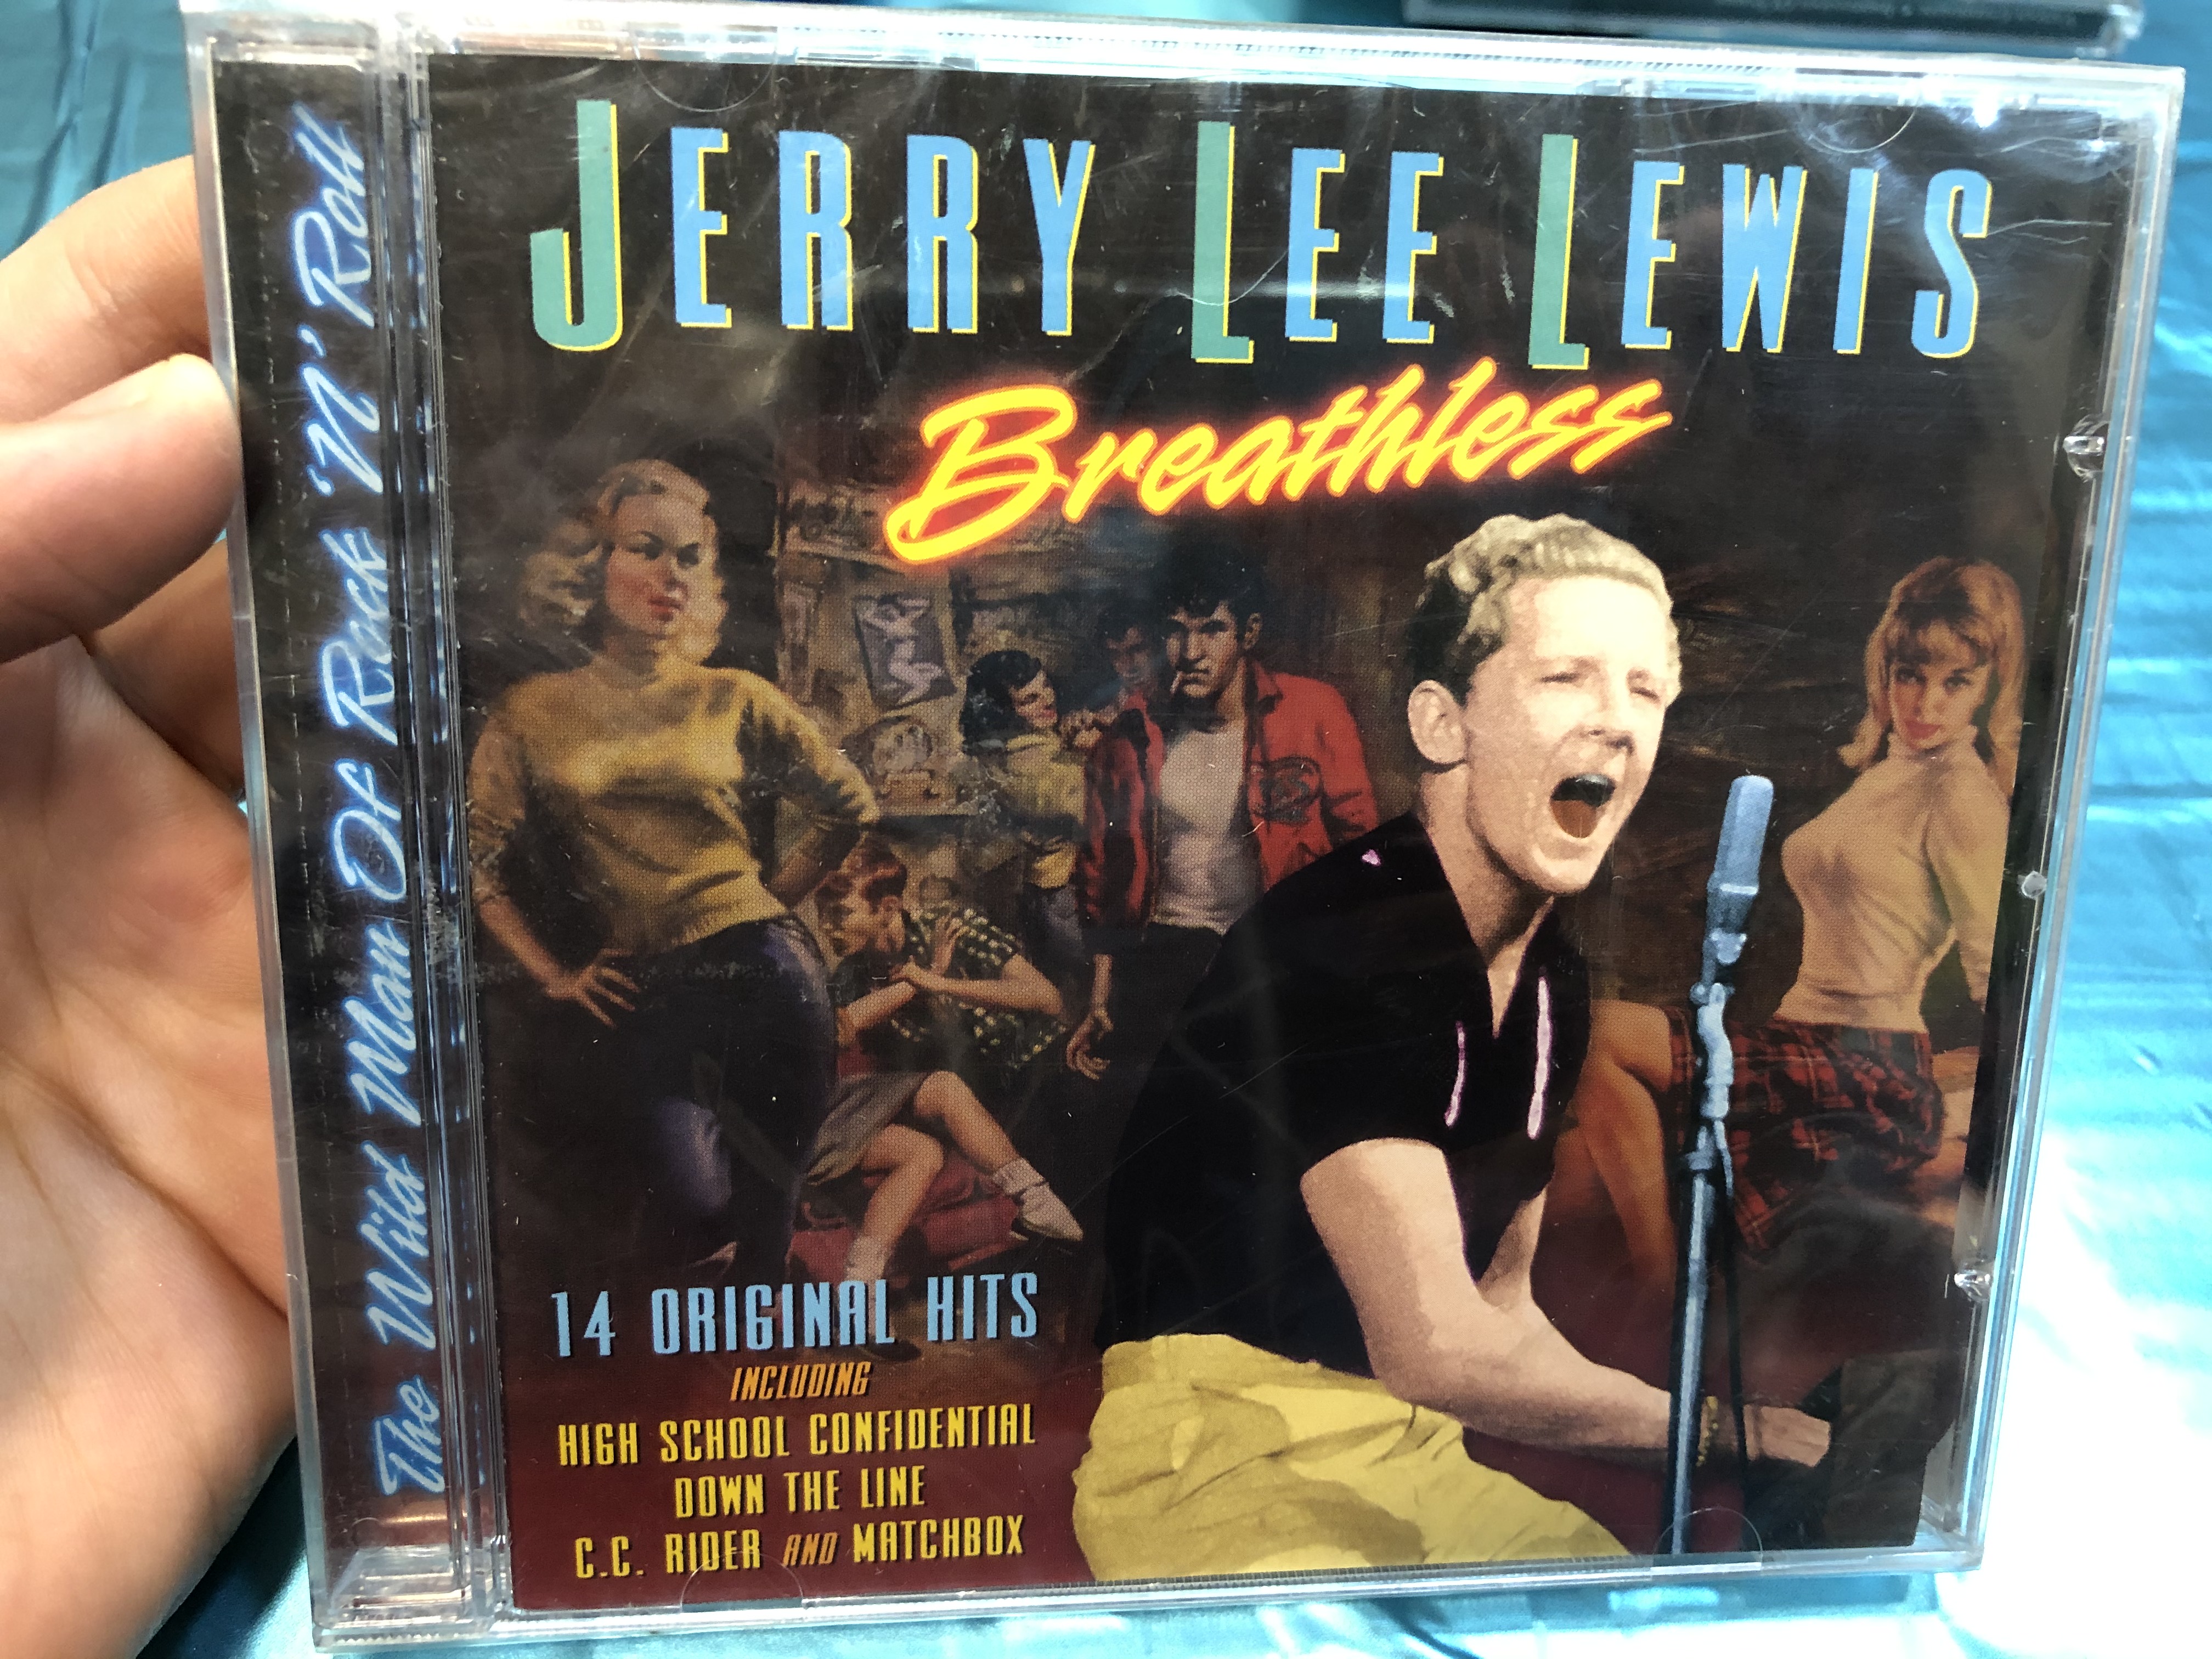 jerry-lee-lewis-breathless-14-original-hits-including-high-school-confidential-down-the-line-c.c.-rider-and-matchbox-prism-leisure-audio-cd-2004-platcd-1282-1-.jpg